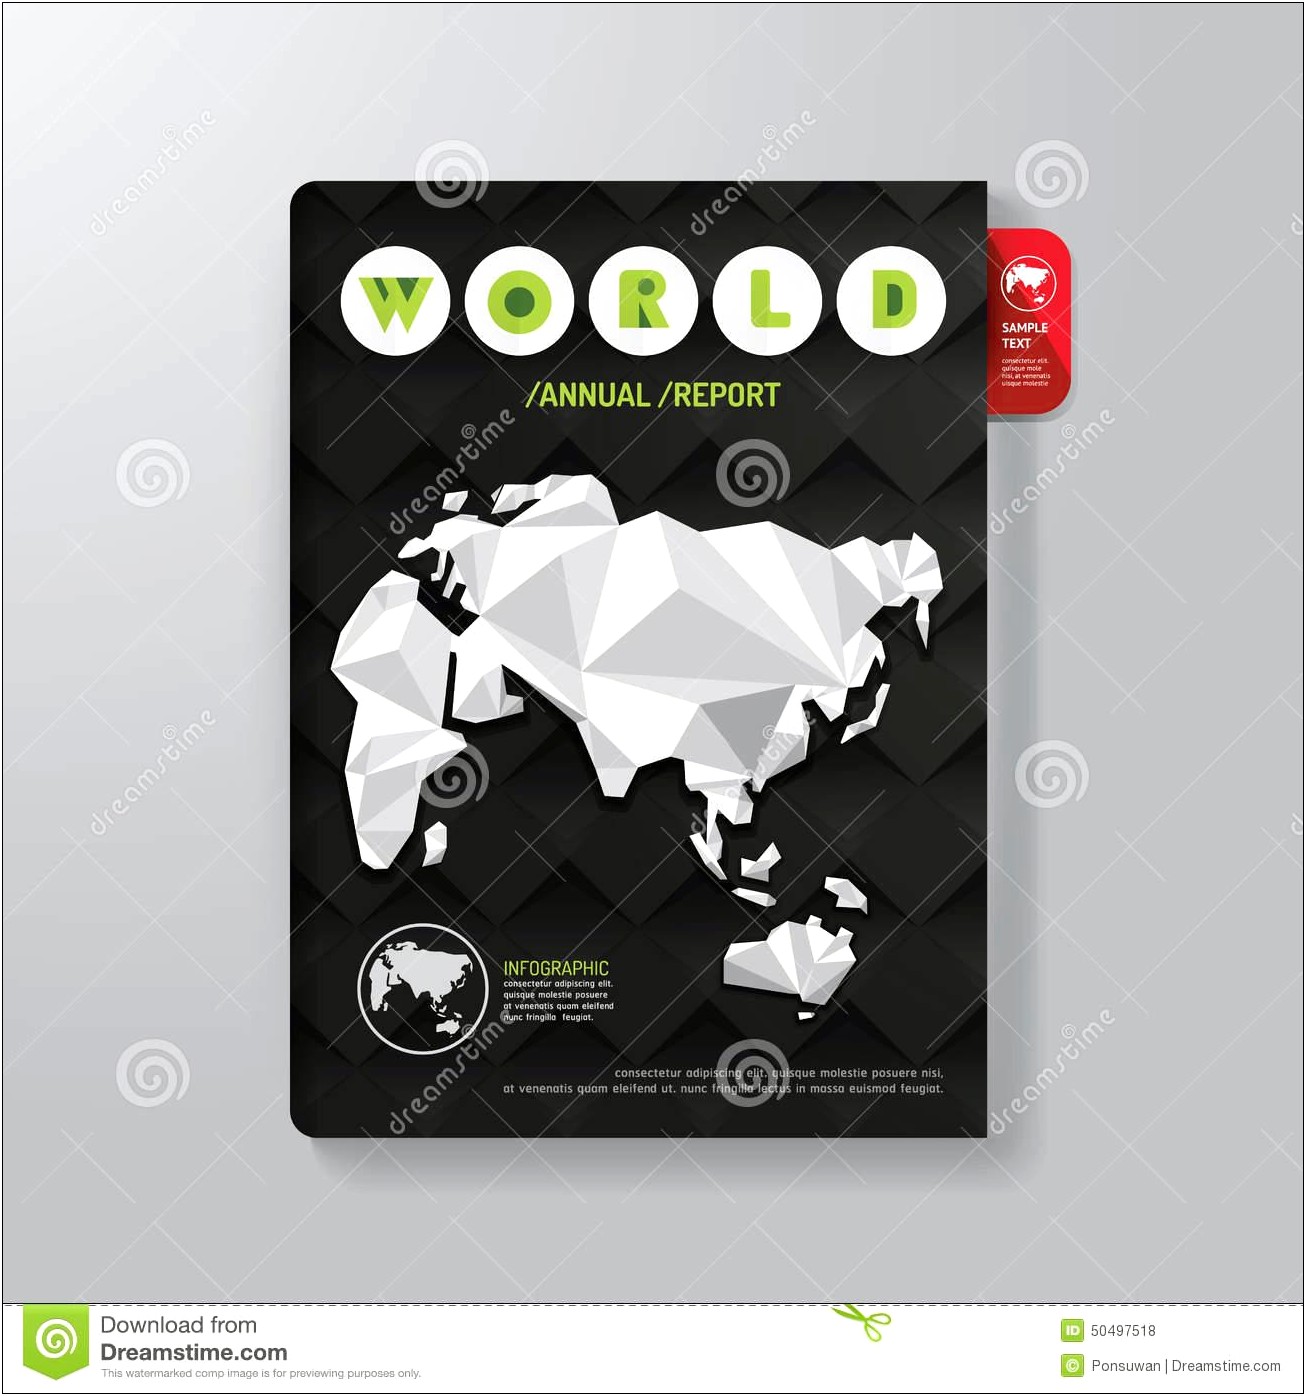 Online Book Jacket Template Free Download